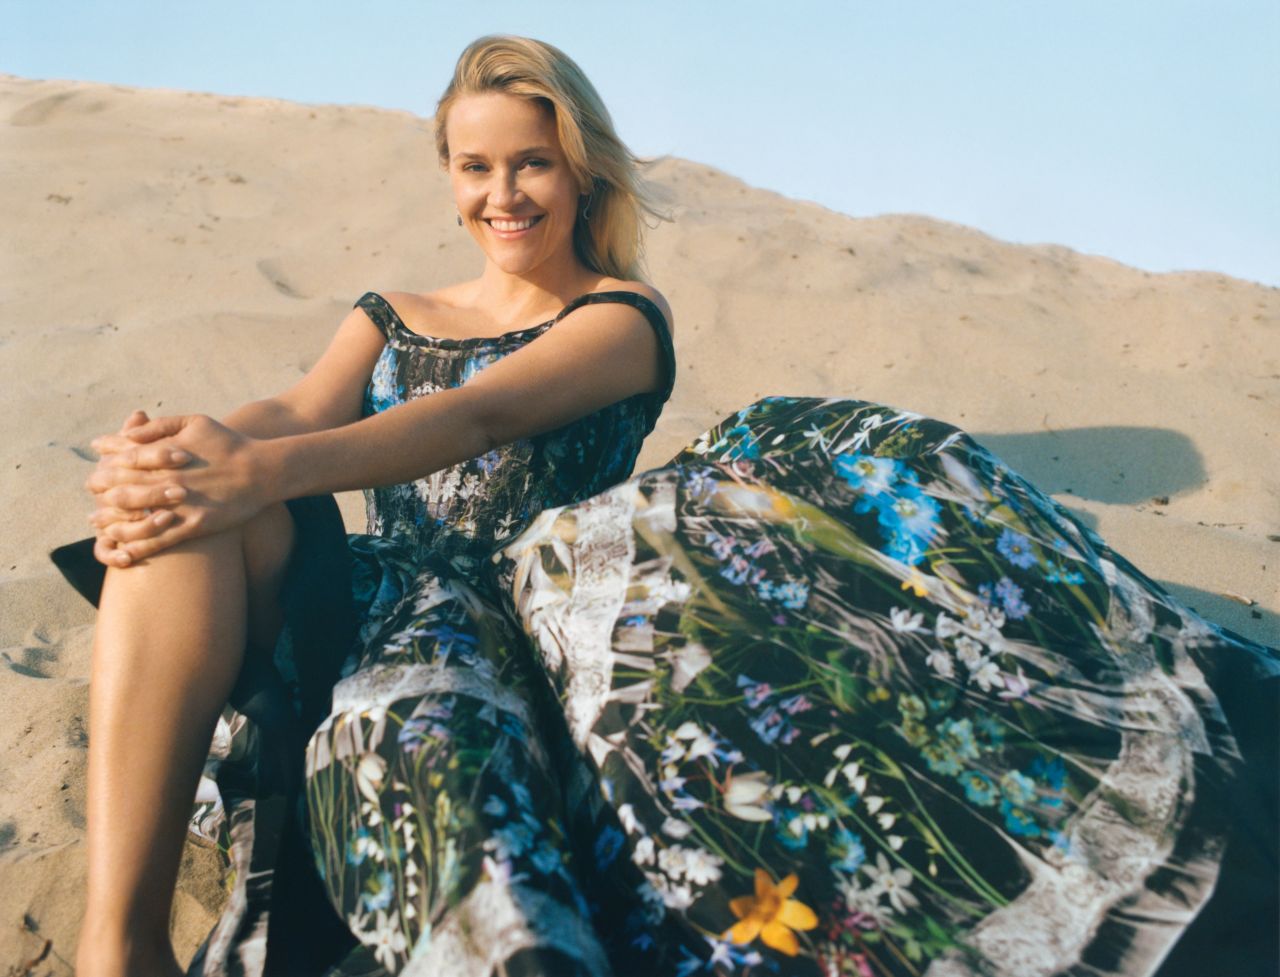 https://celebmafia.com/wp-content/uploads/2019/01/reese-witherspoon-vogue-us-february-2019-3.jpg